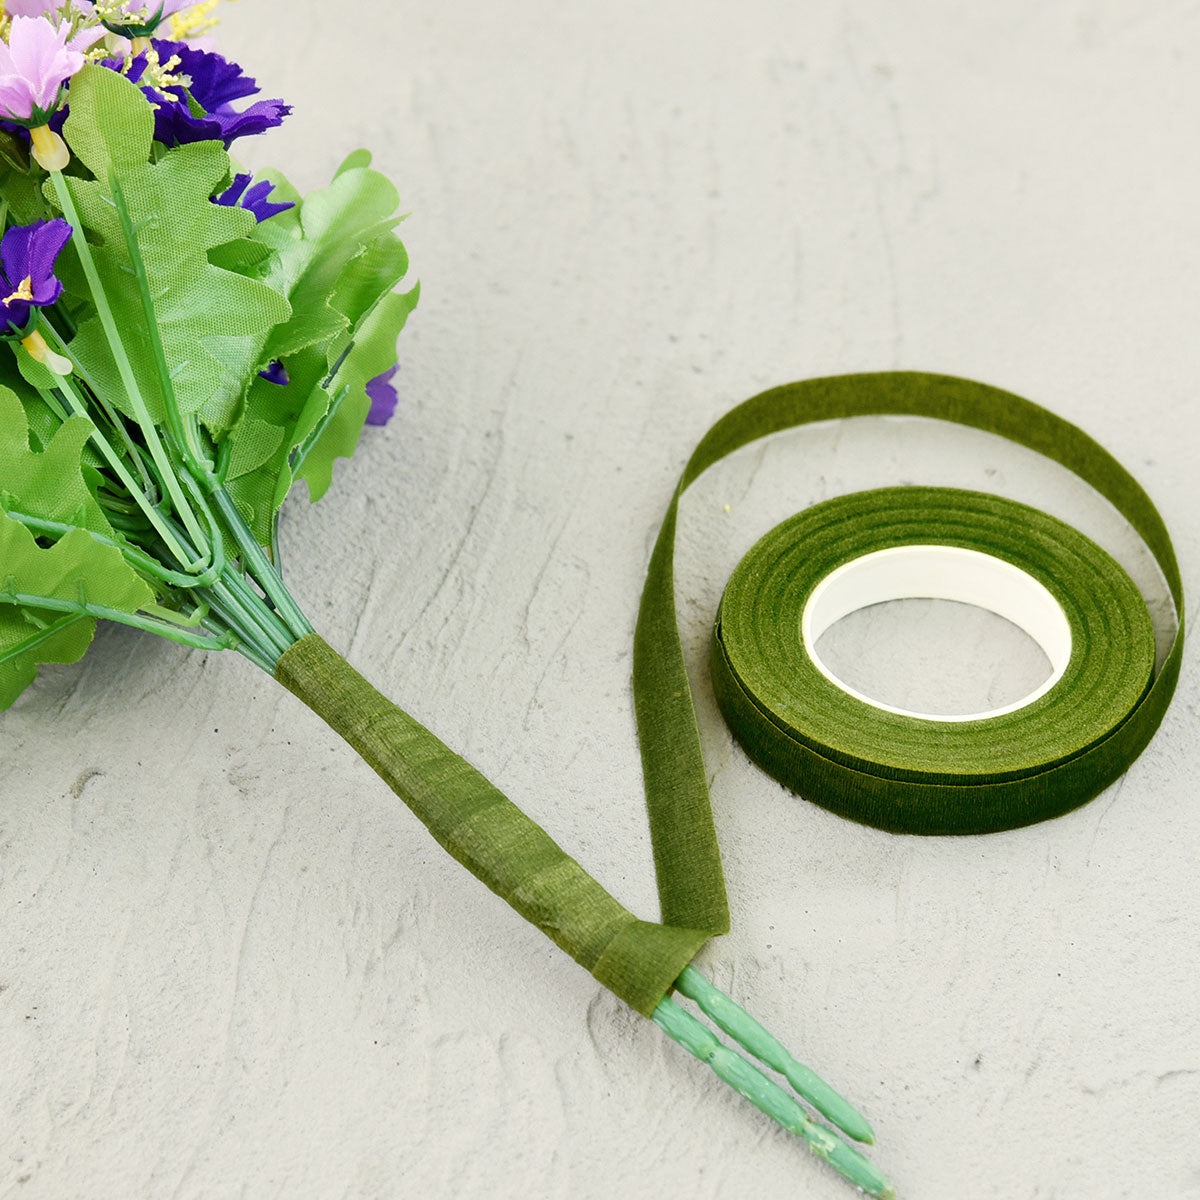 Moss Green Floral Tapes (60 Yards) Binds Flower Stems Together for Bouquets Corsages Boutonnieres 2-Pack